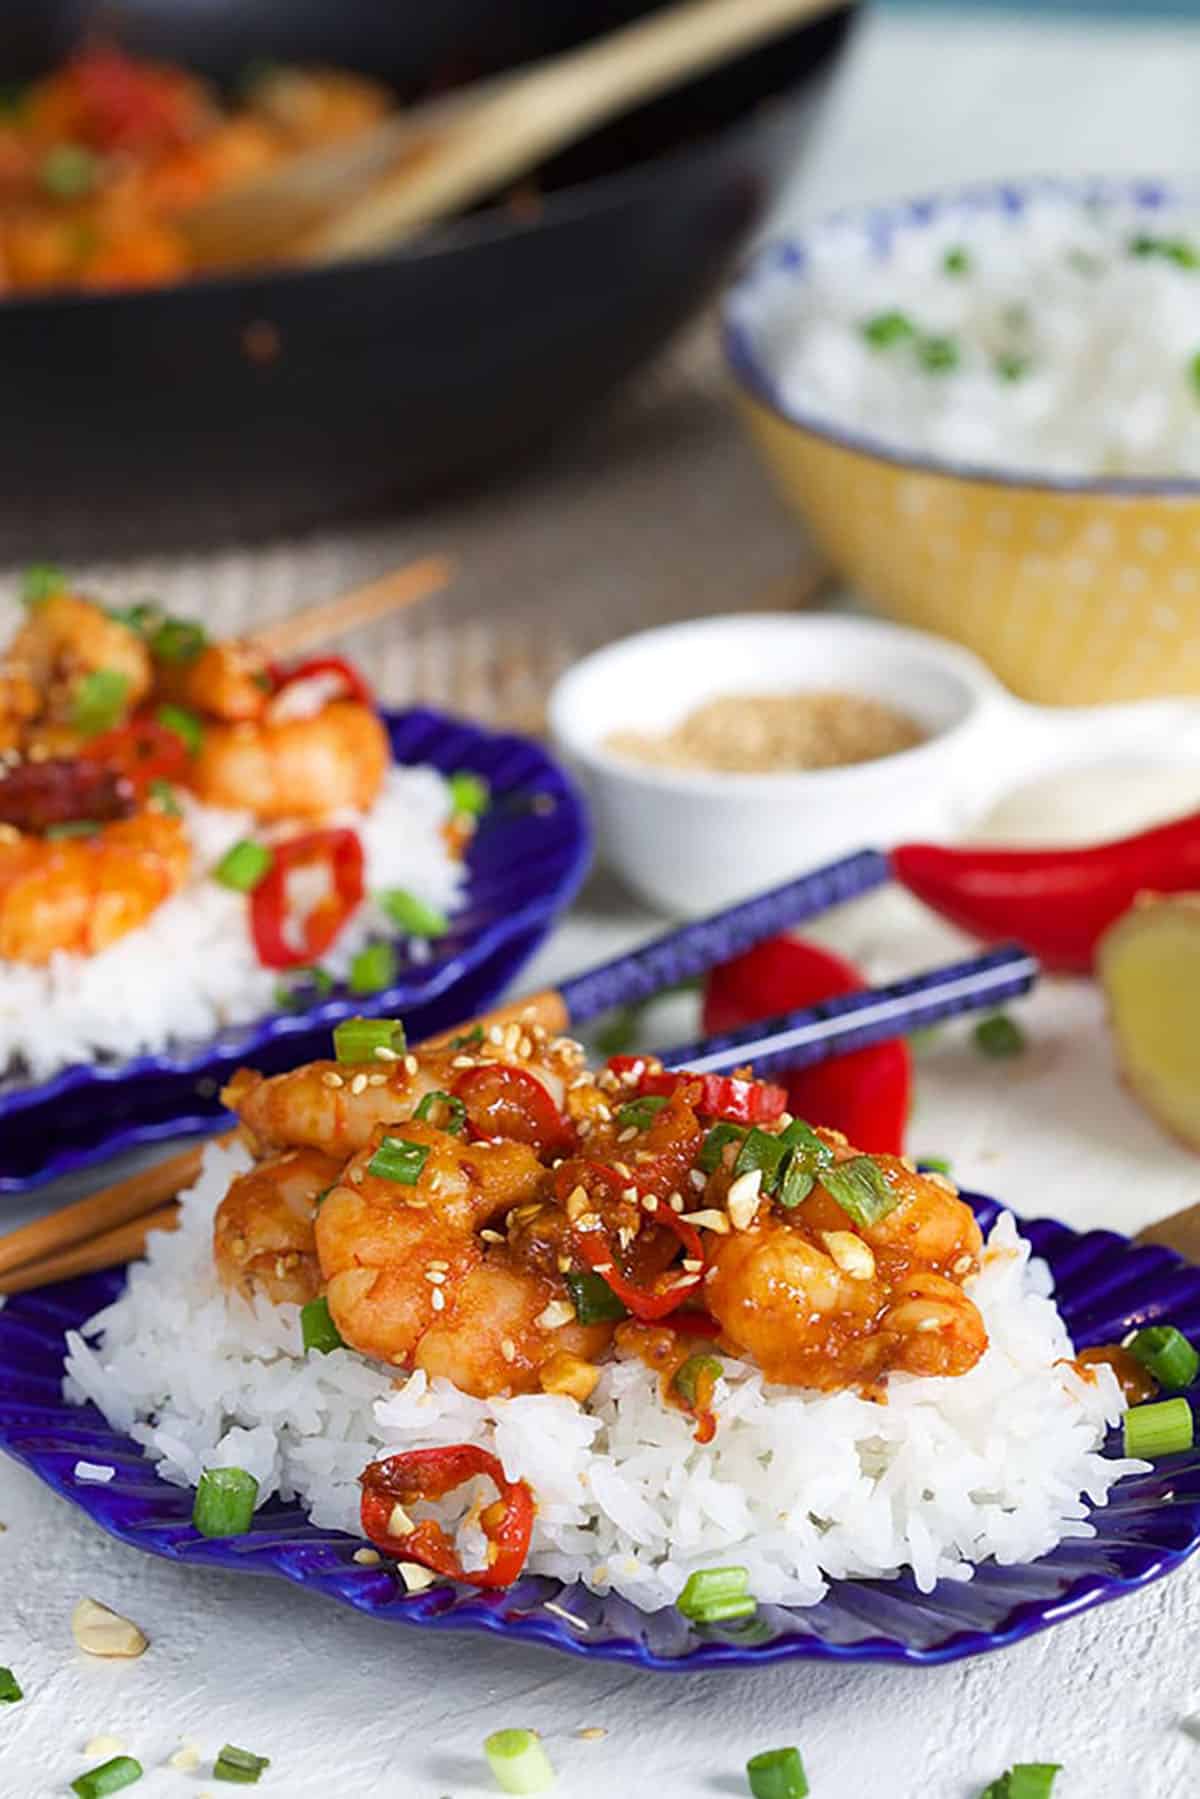 Two plates of rice and shrimp are presented on a table.